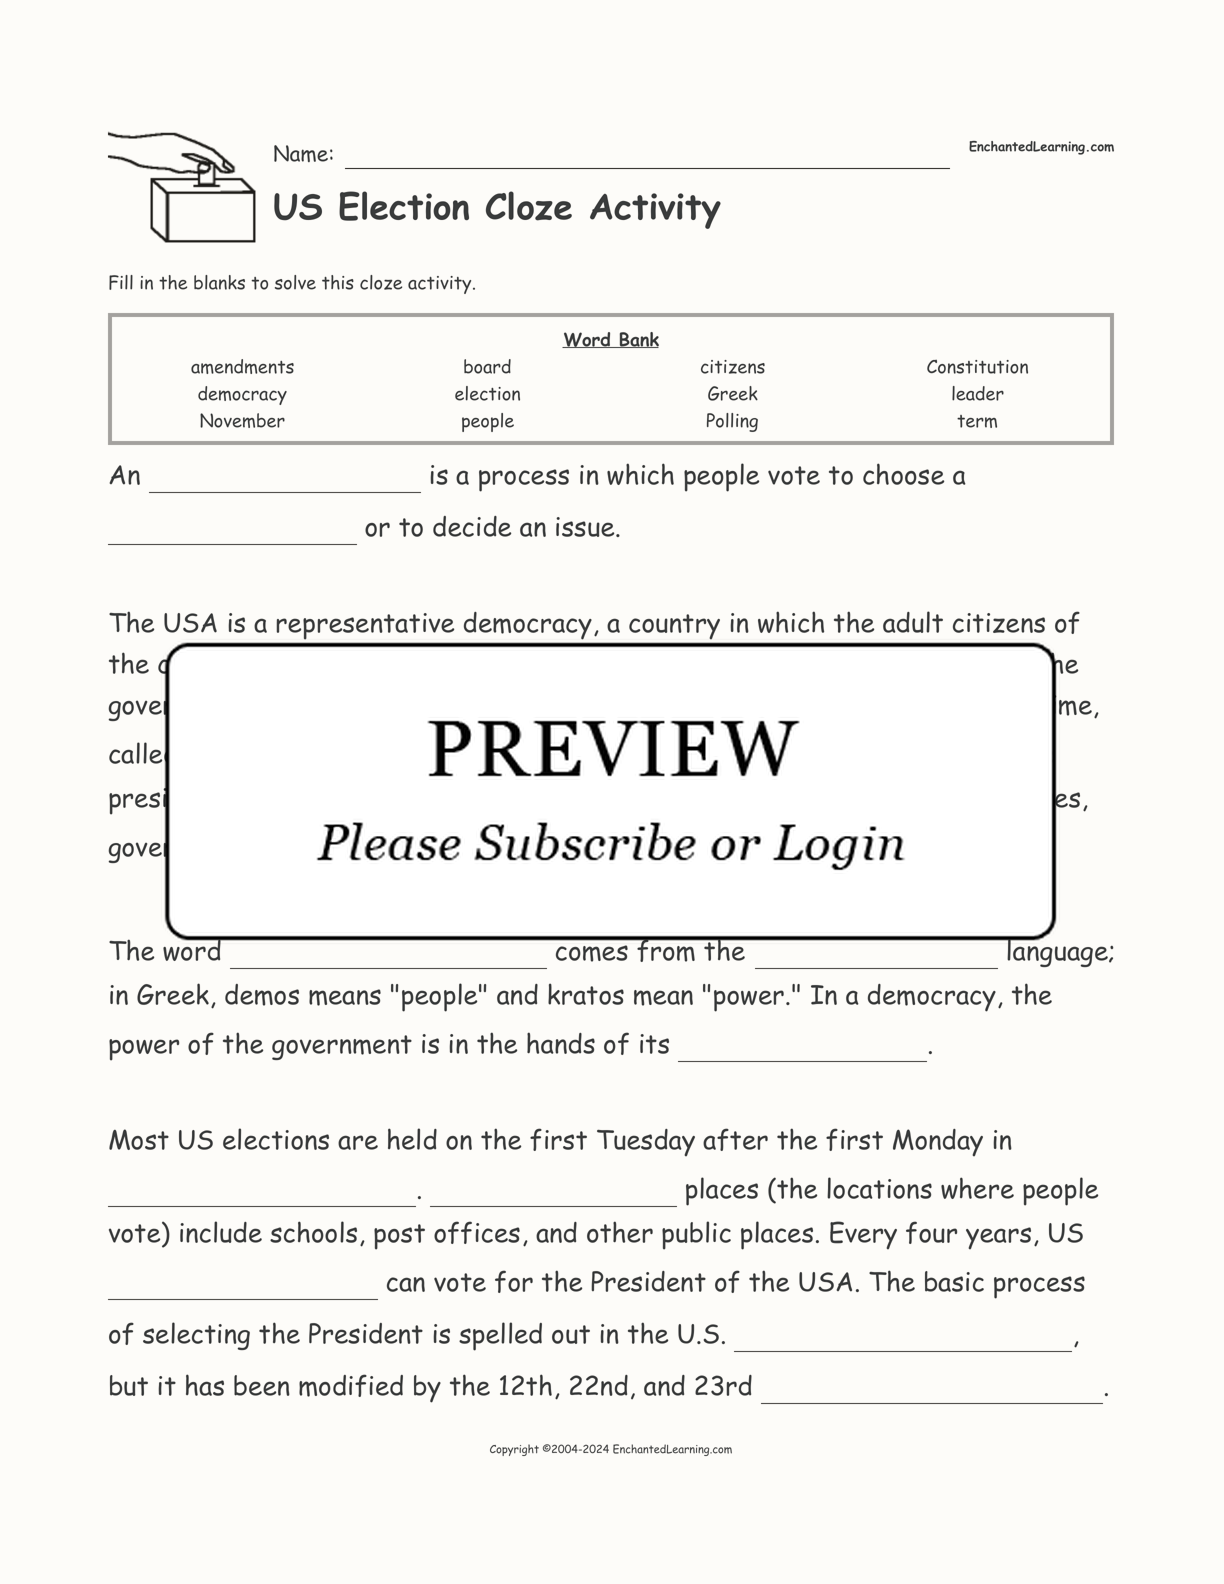 US Election Cloze Activity interactive worksheet page 1